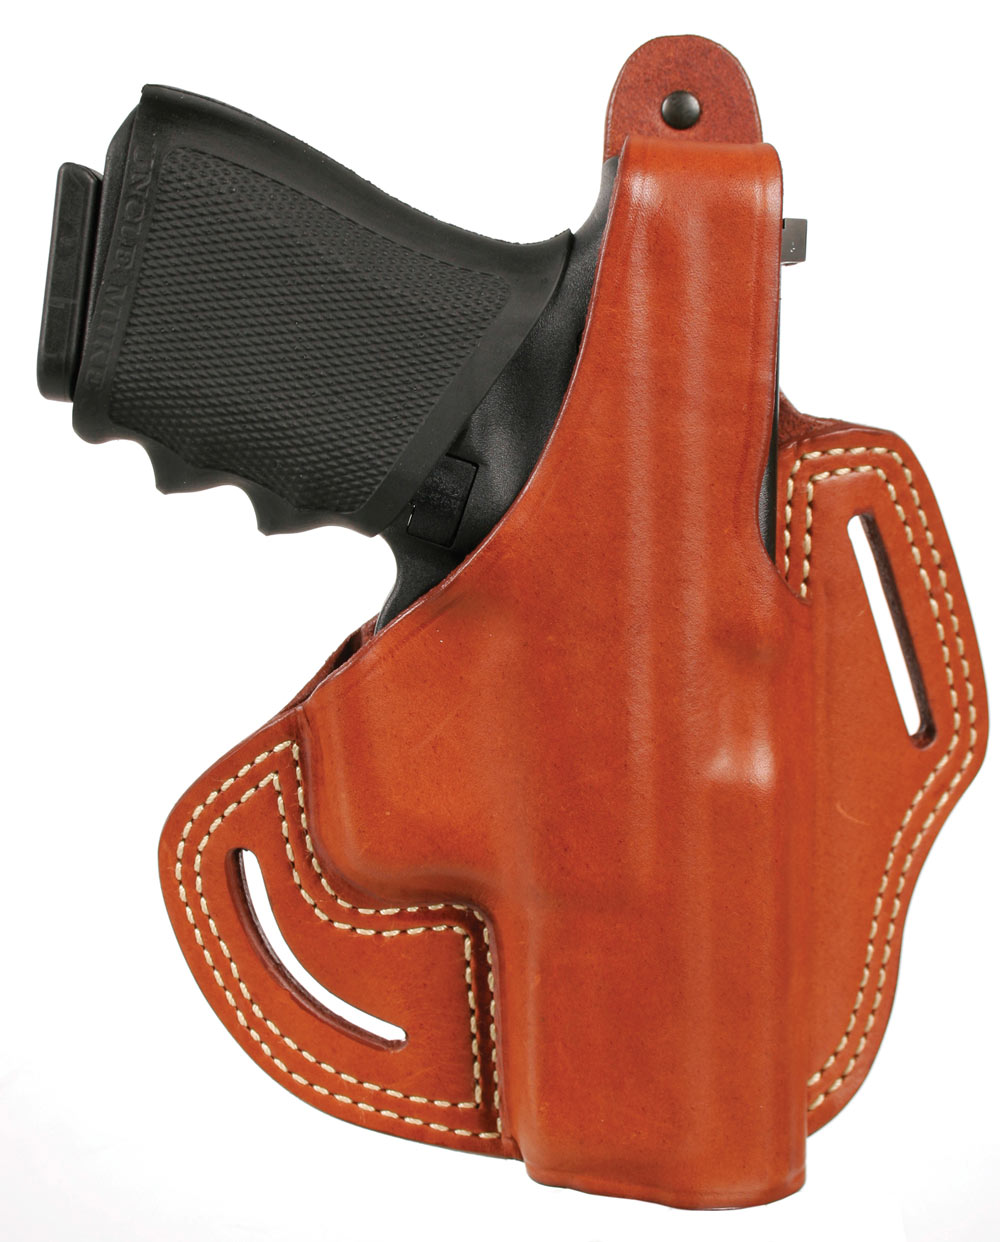 The Leather Slide Holster from Blackhawk! features a thumb break snap that provides a simple, extra measure of retention.